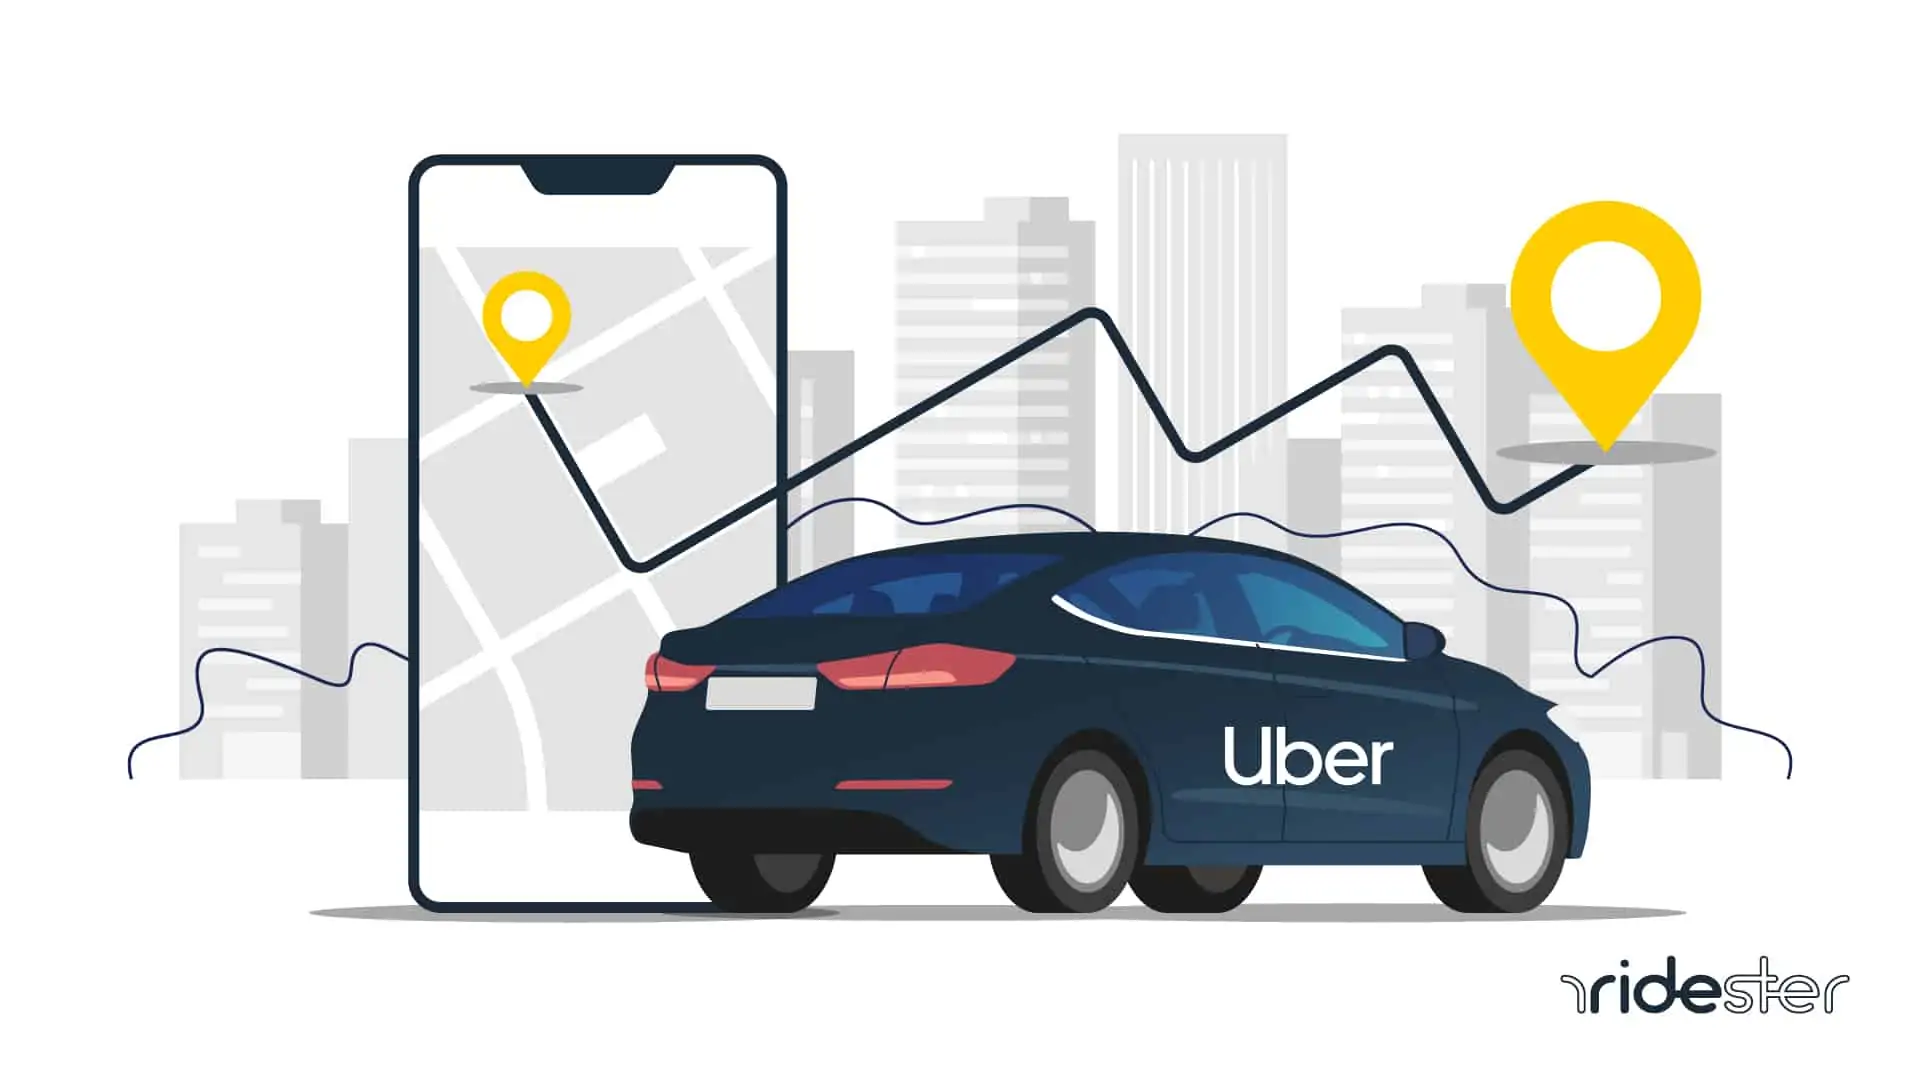 a vector image of an uber vehicle on a map graphic and map marker points to indicate long distance uber ride